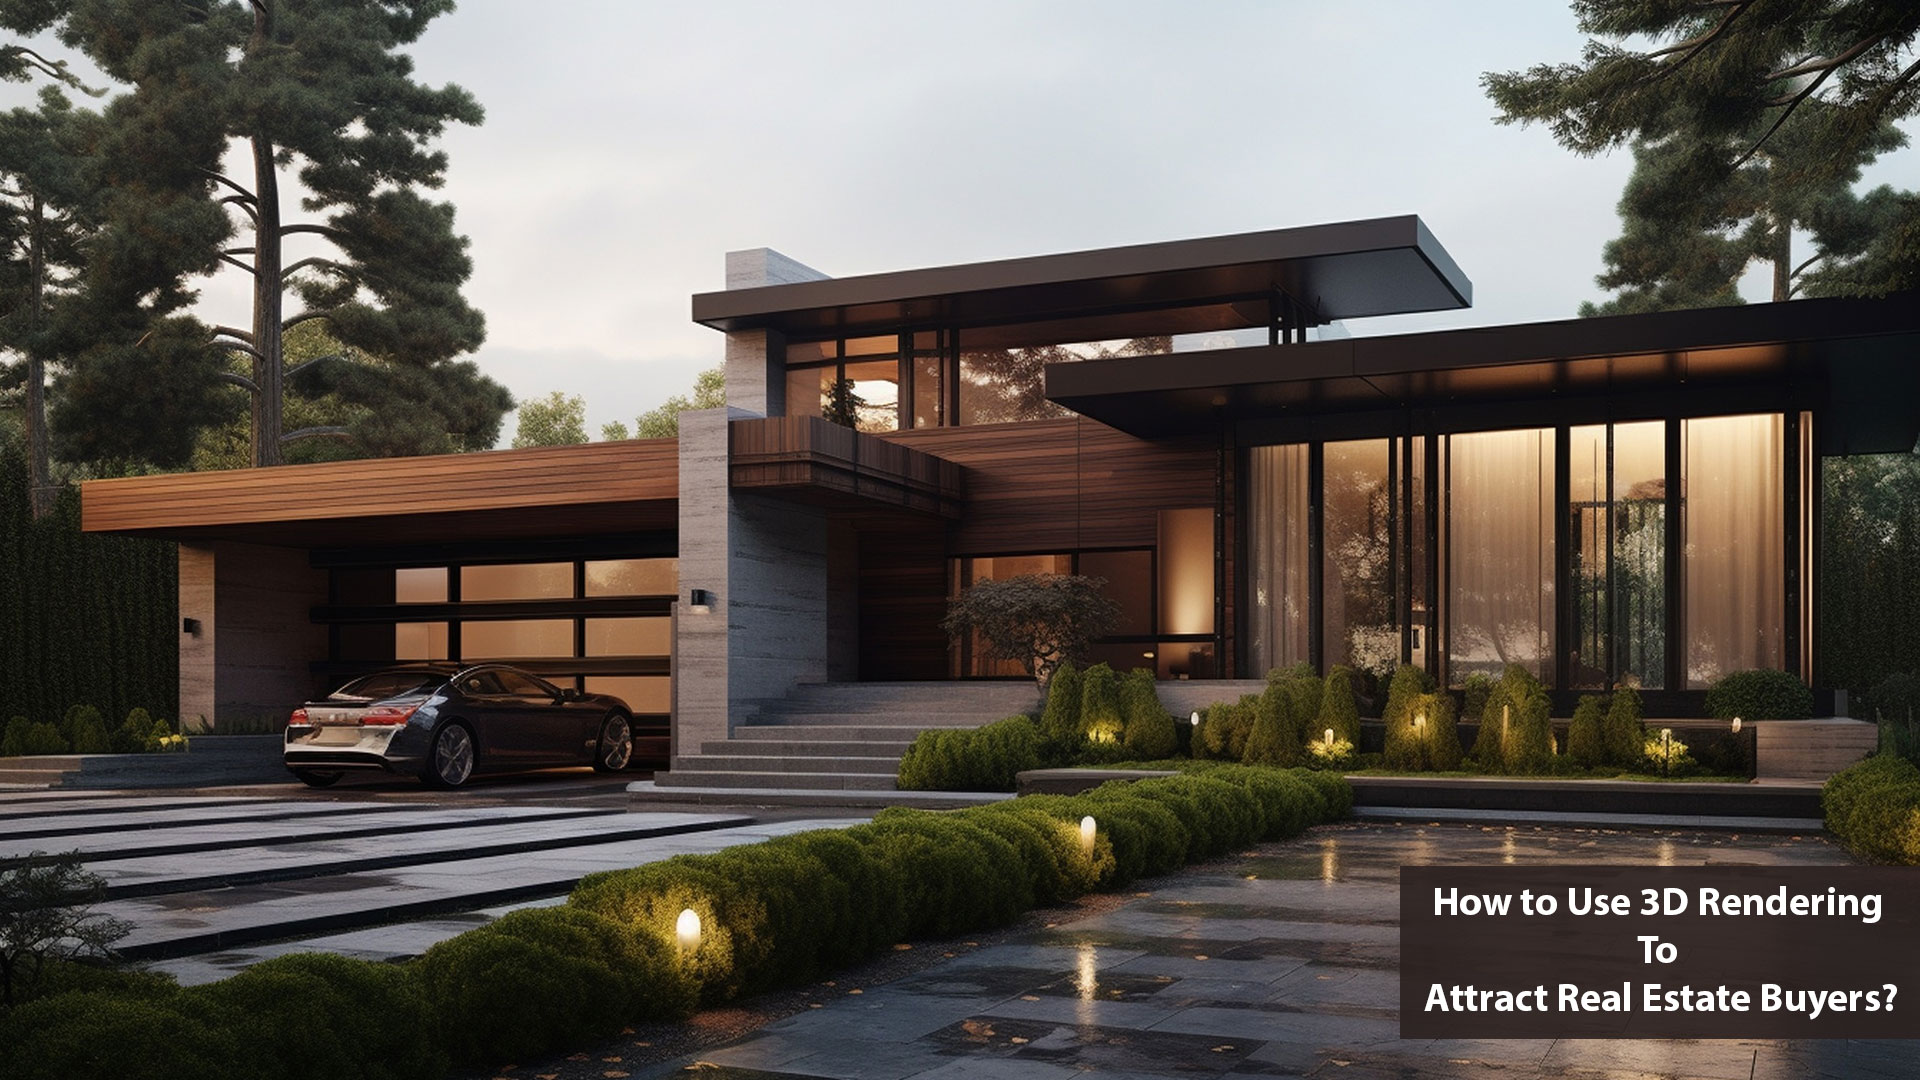 How to Use 3D Rendering to Attract Real Estate Buyers?